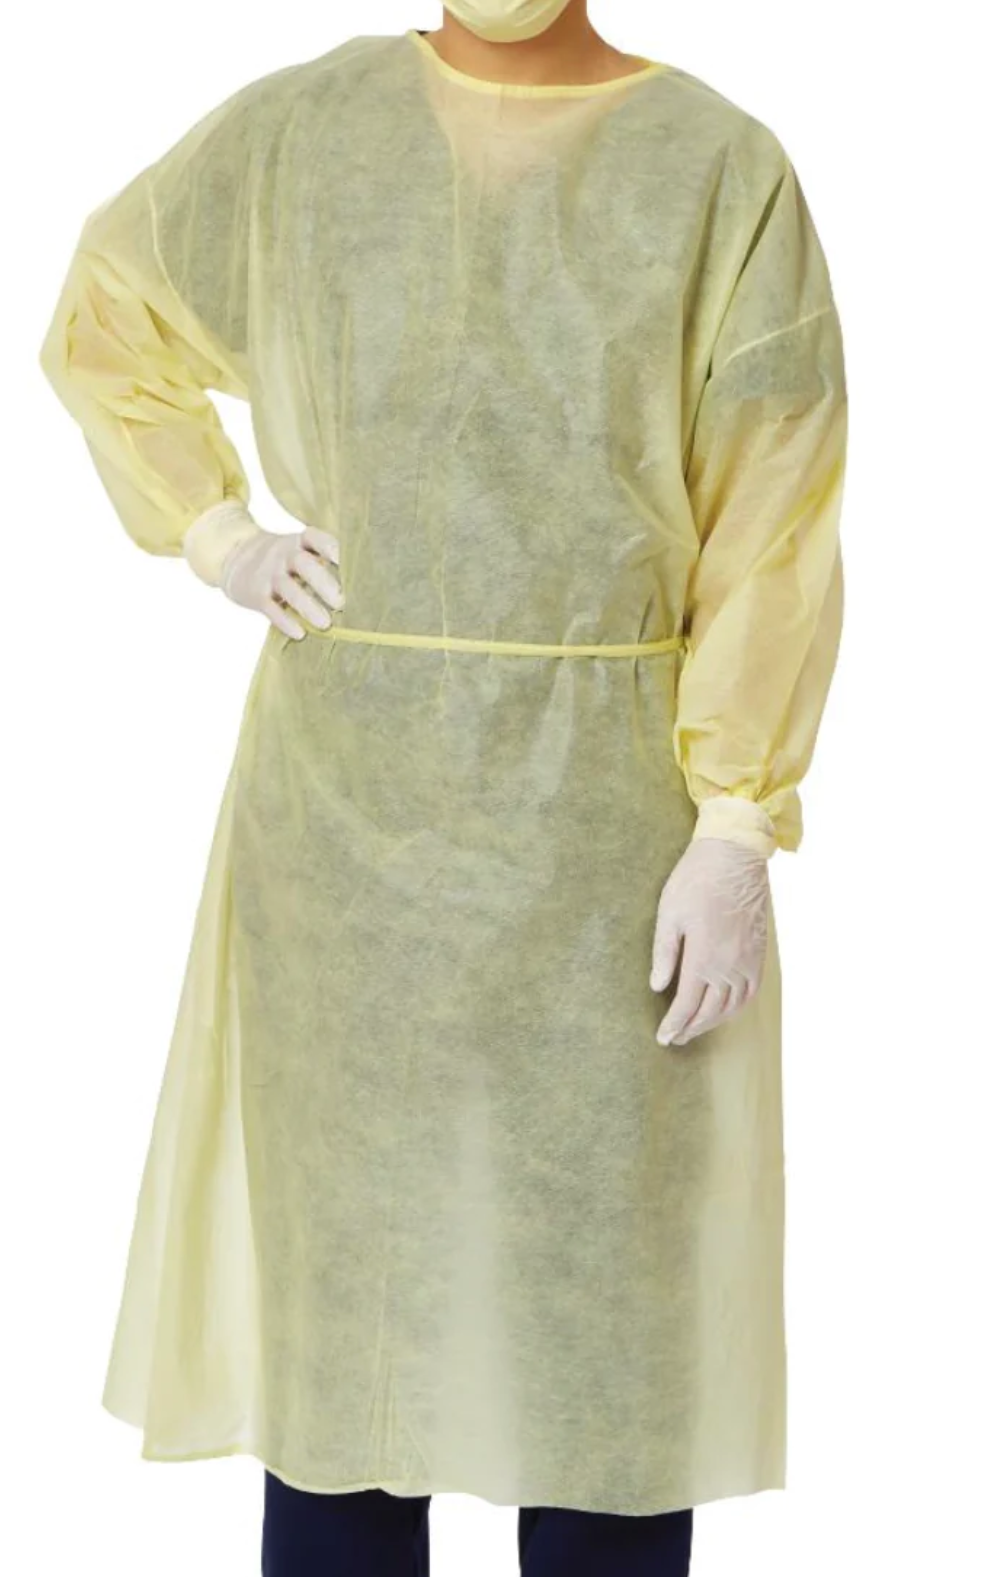 Disposable Isolation Gown 10 pack XL